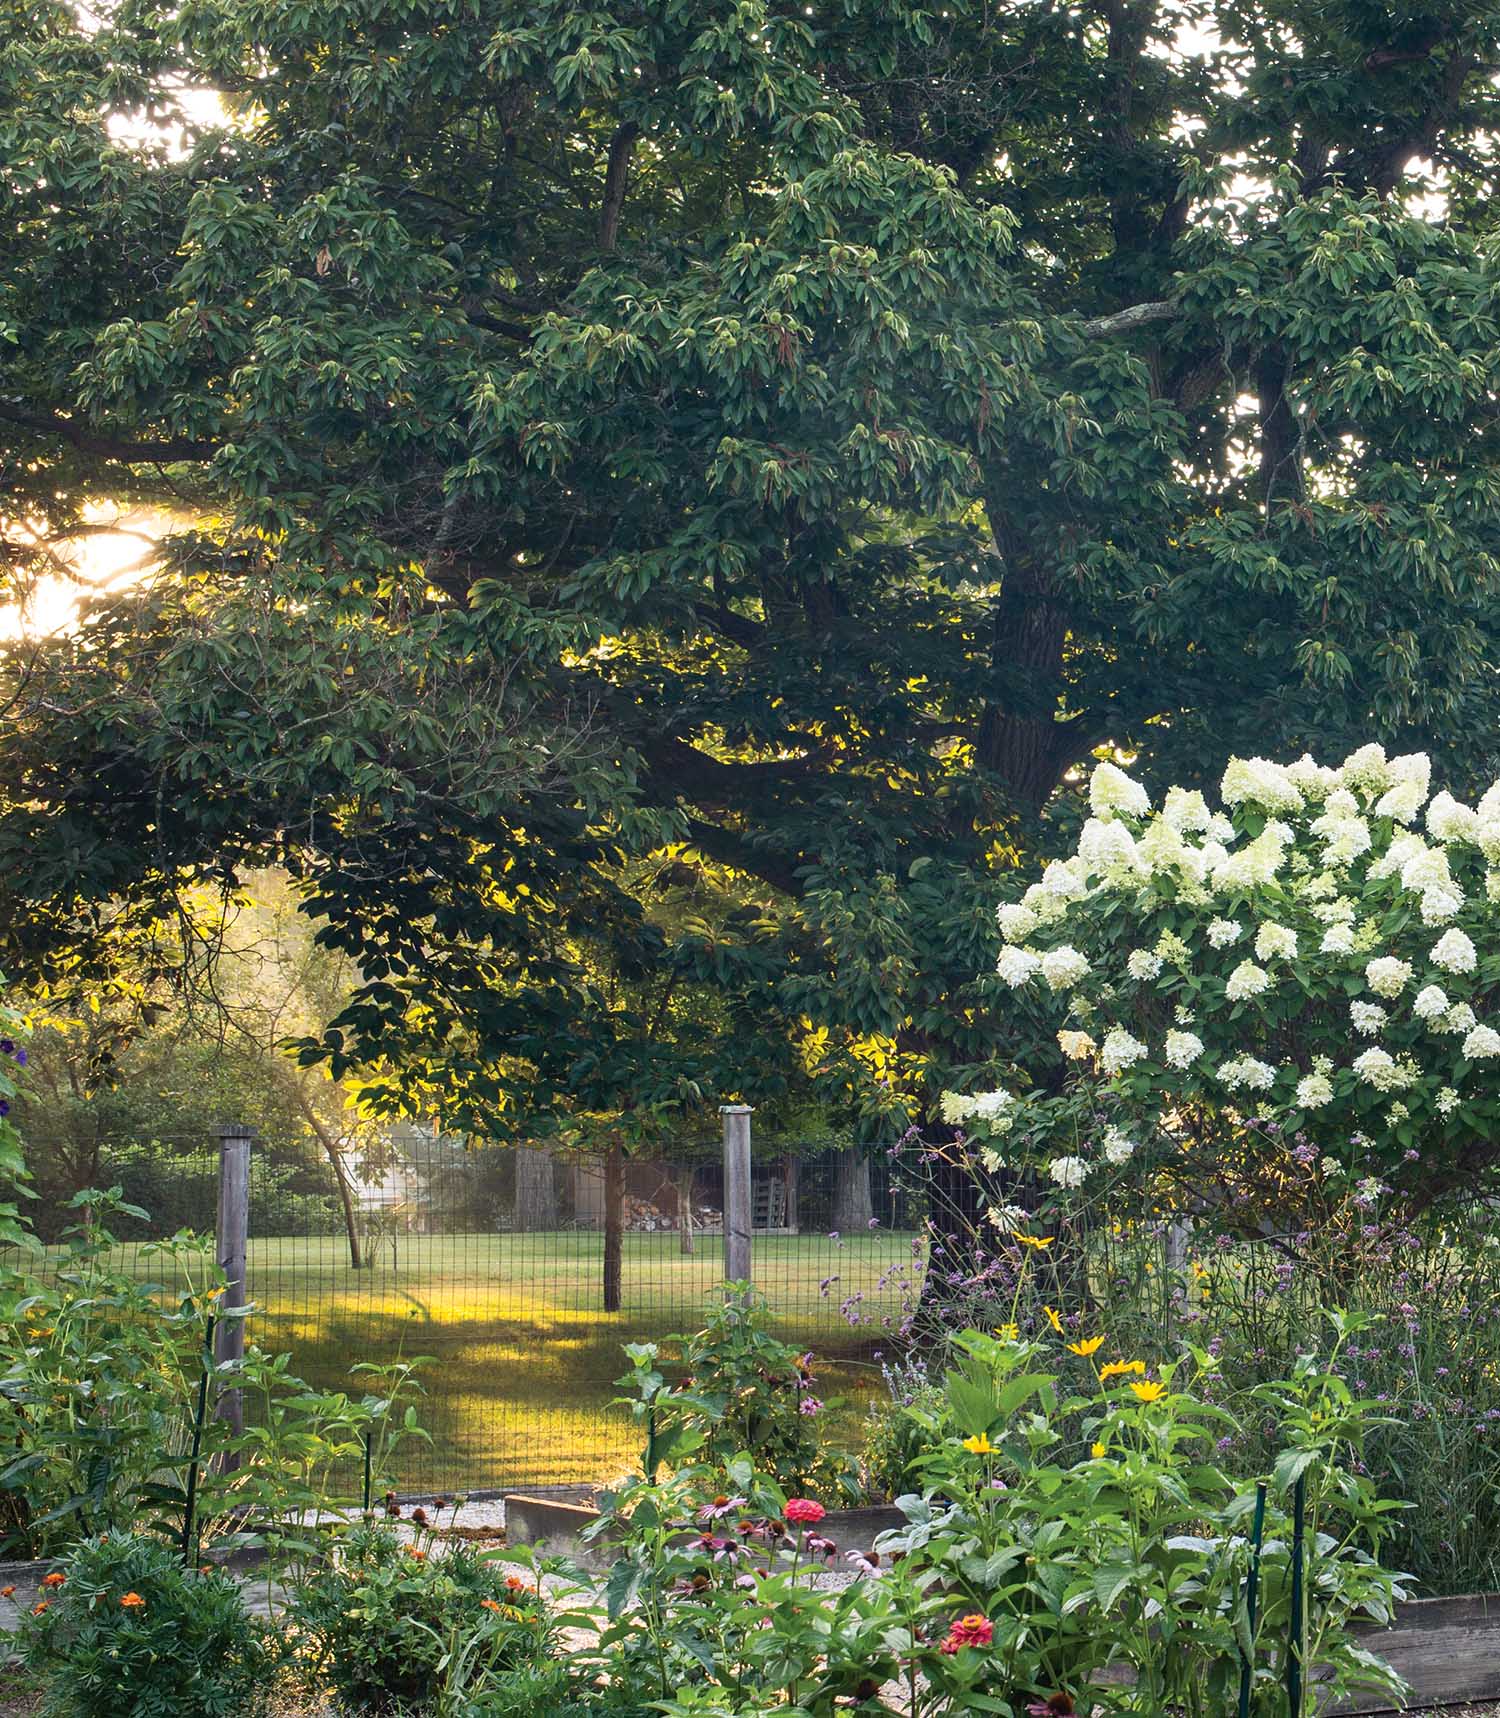 Afternoon light peers through trees into a flowering garden.